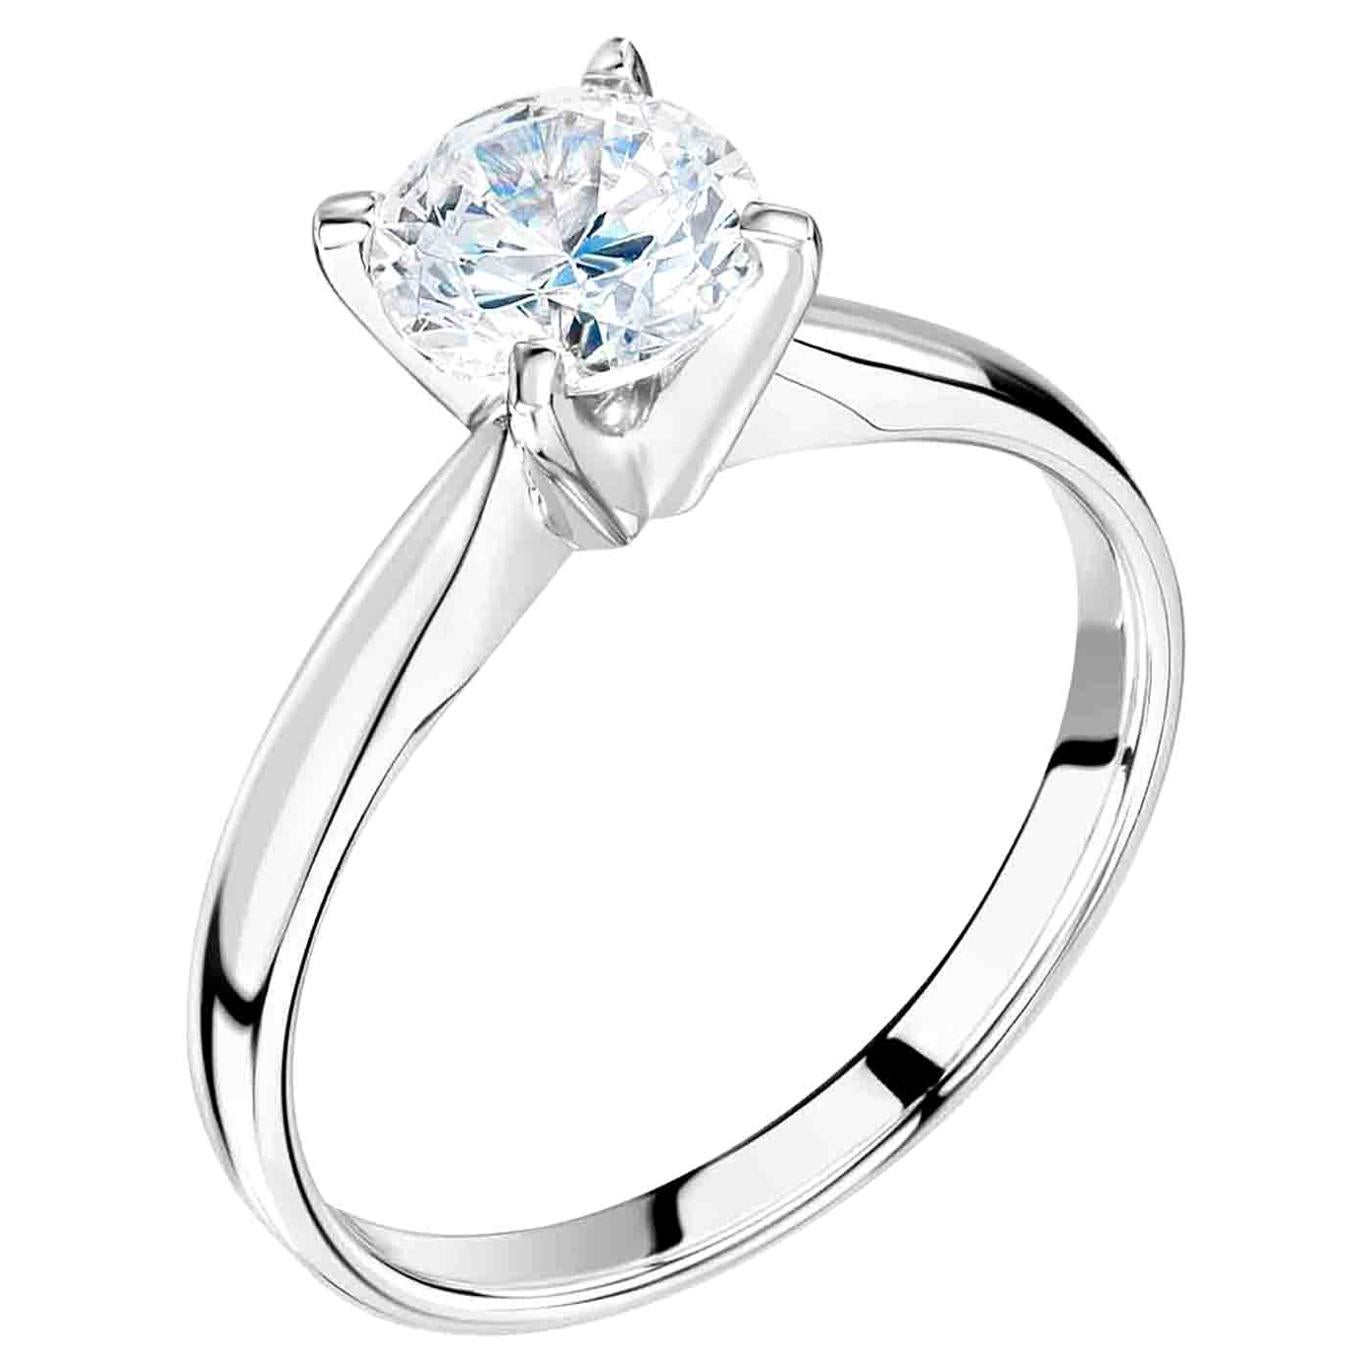 1 Carat, Round Cut 'Wedfit' Diamond Wedding Ring and Engagement Ring Combination For Sale